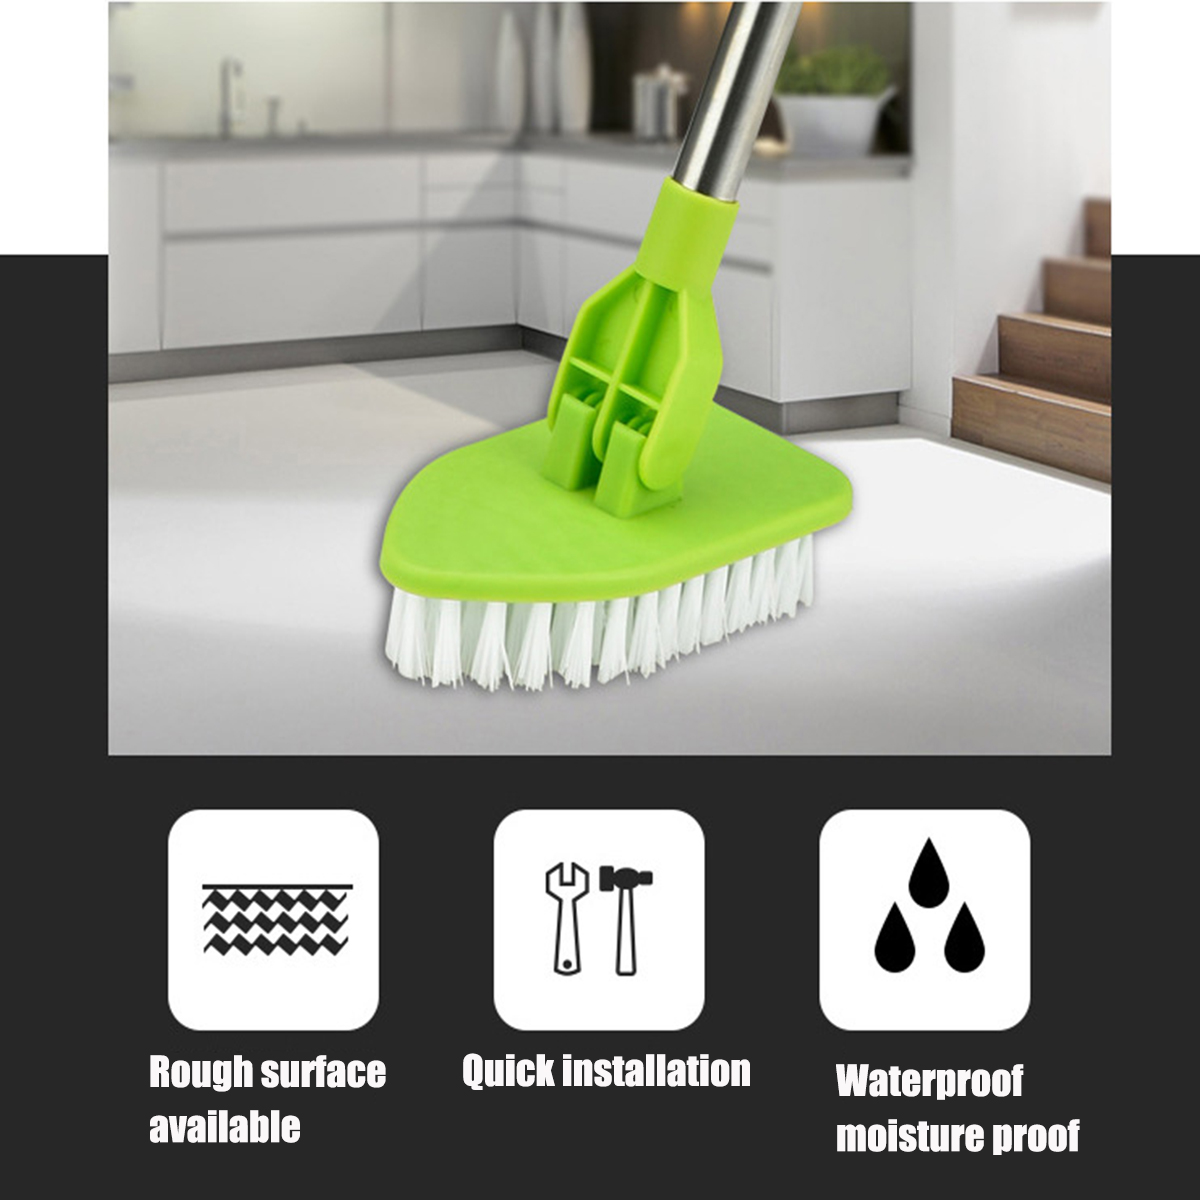 Length-and-Angel-Adjustable-Kitchen-Cleaning-Brushes-Quick-Installation-Multi-brush-Scrubber-Cleaner-1369842-1